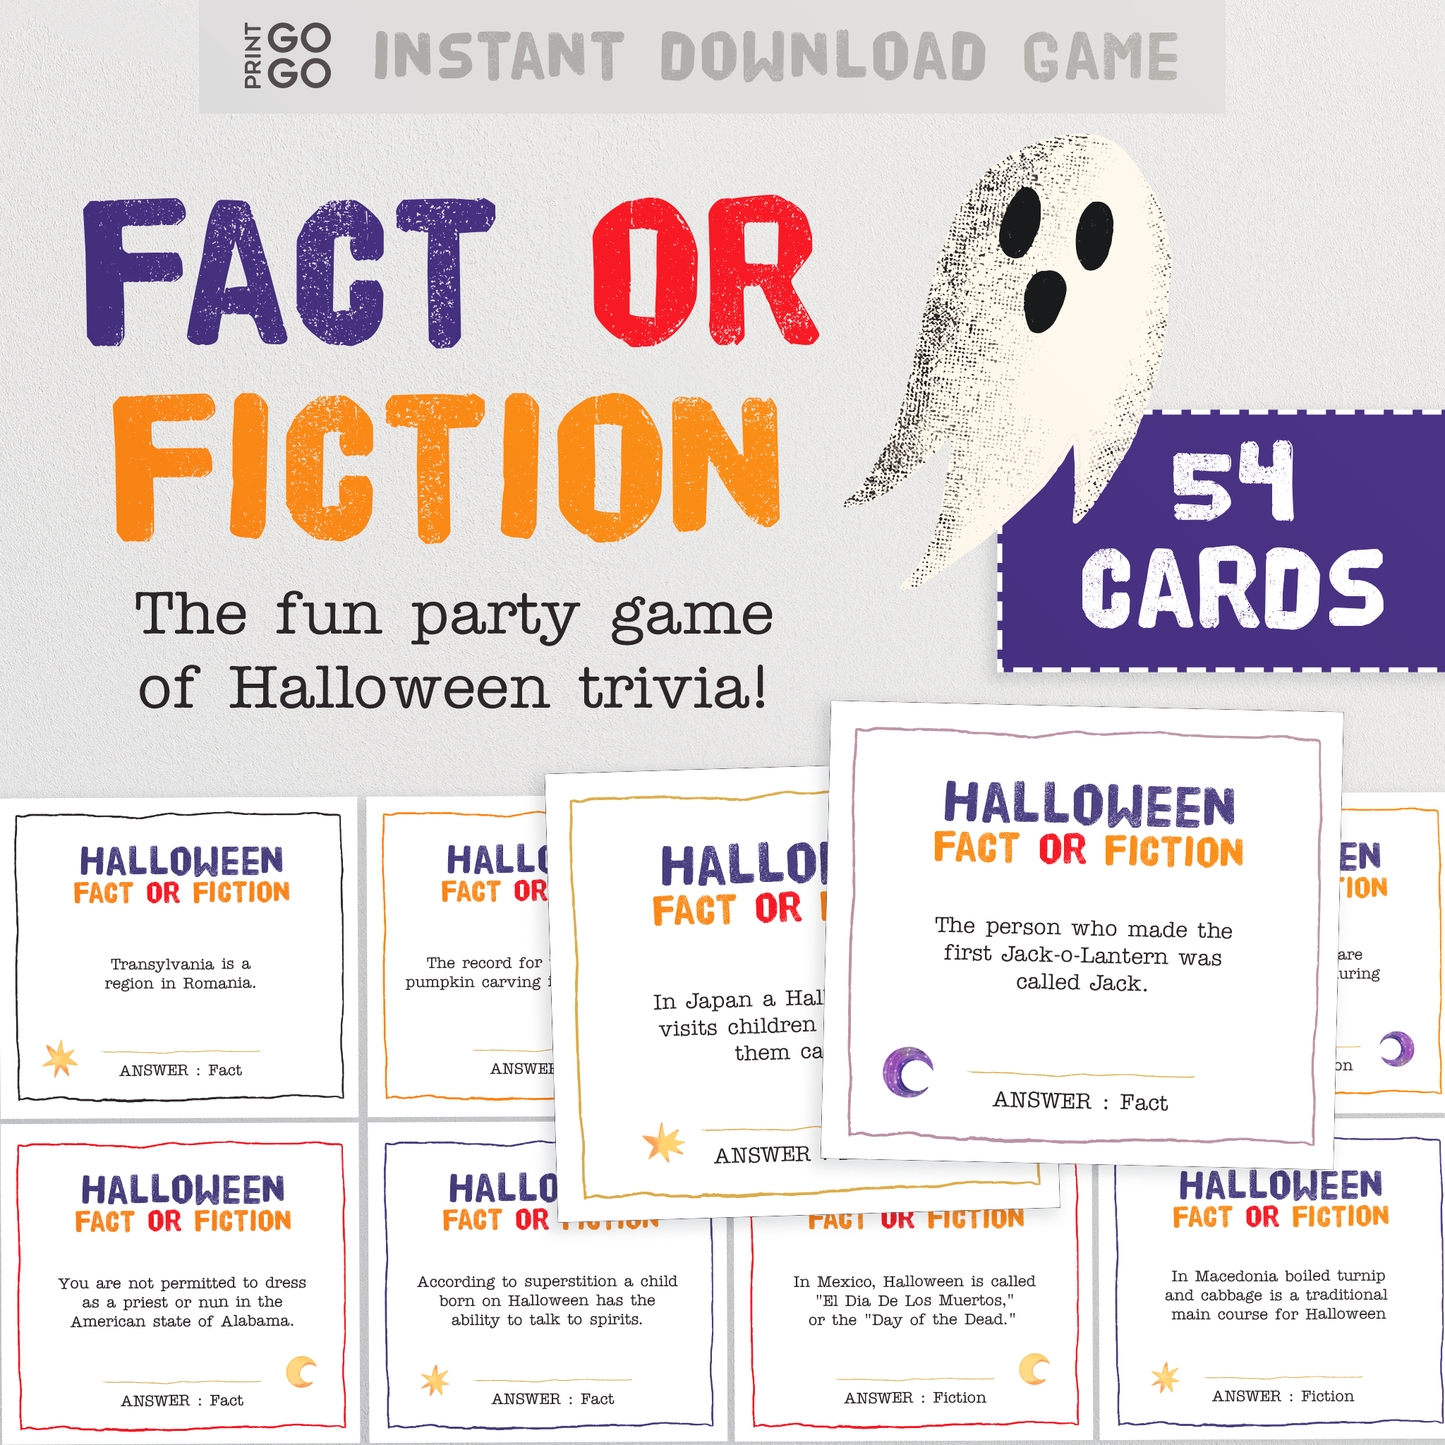 Halloween Fact or Fiction - The Fun Group Party Game of Halloween Trivia